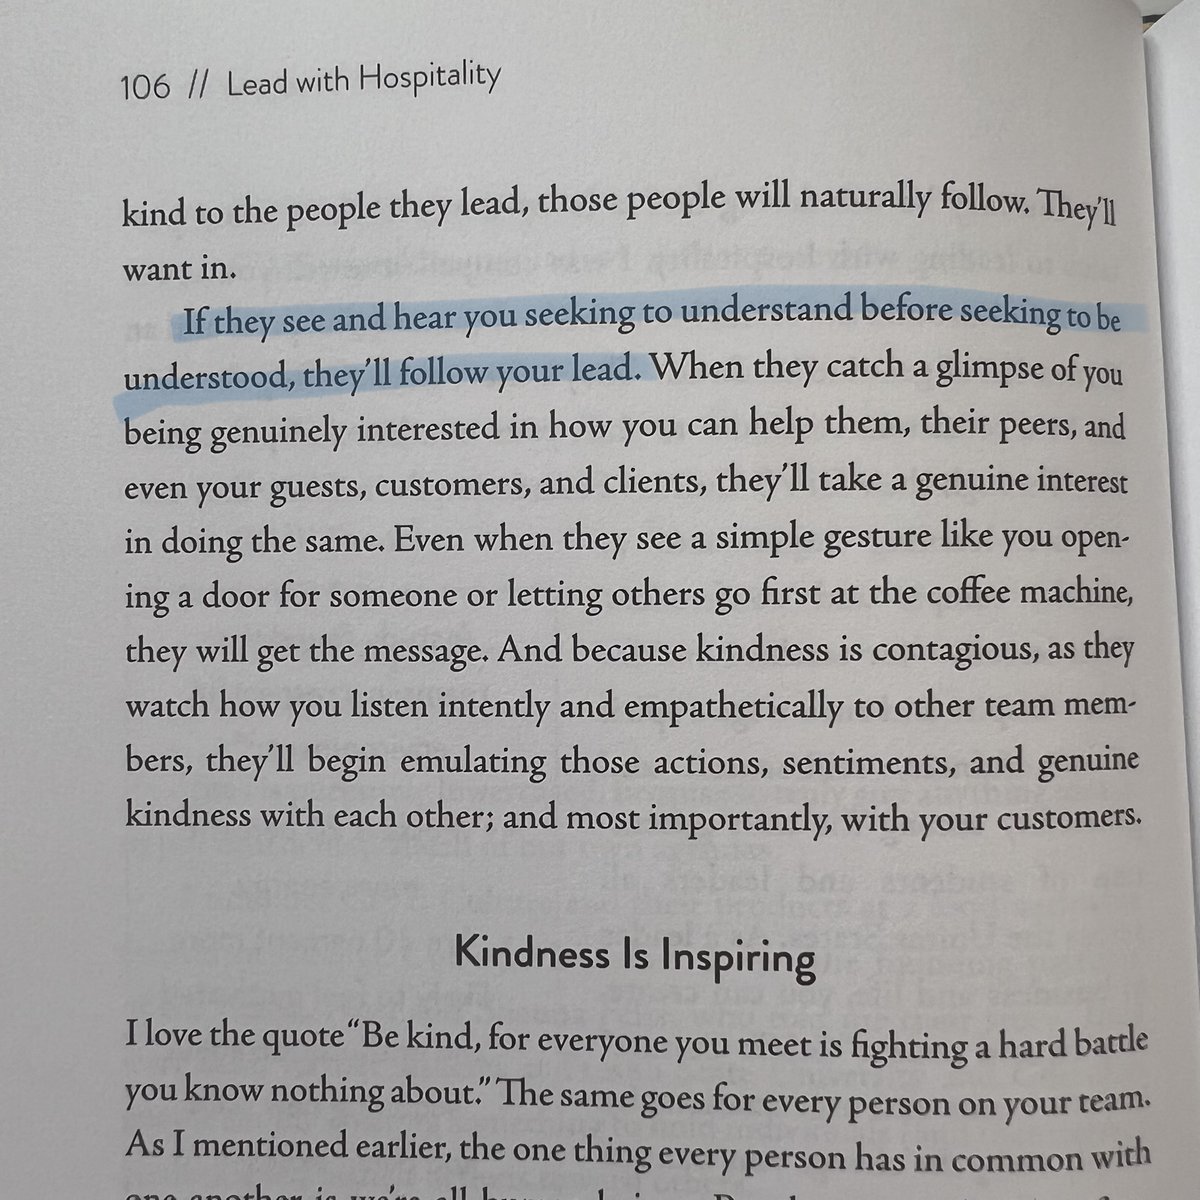 Wish your team would seek to understand you? Go first. 

📷 'Lead with Hospitality' page 106

Get your copy of 'Lead with Hospitality' at your favorite bookstore! 

#HRHospitality #EmployeeEngagement #InspireTeams #HRLeadership #KeynoteSpeaker